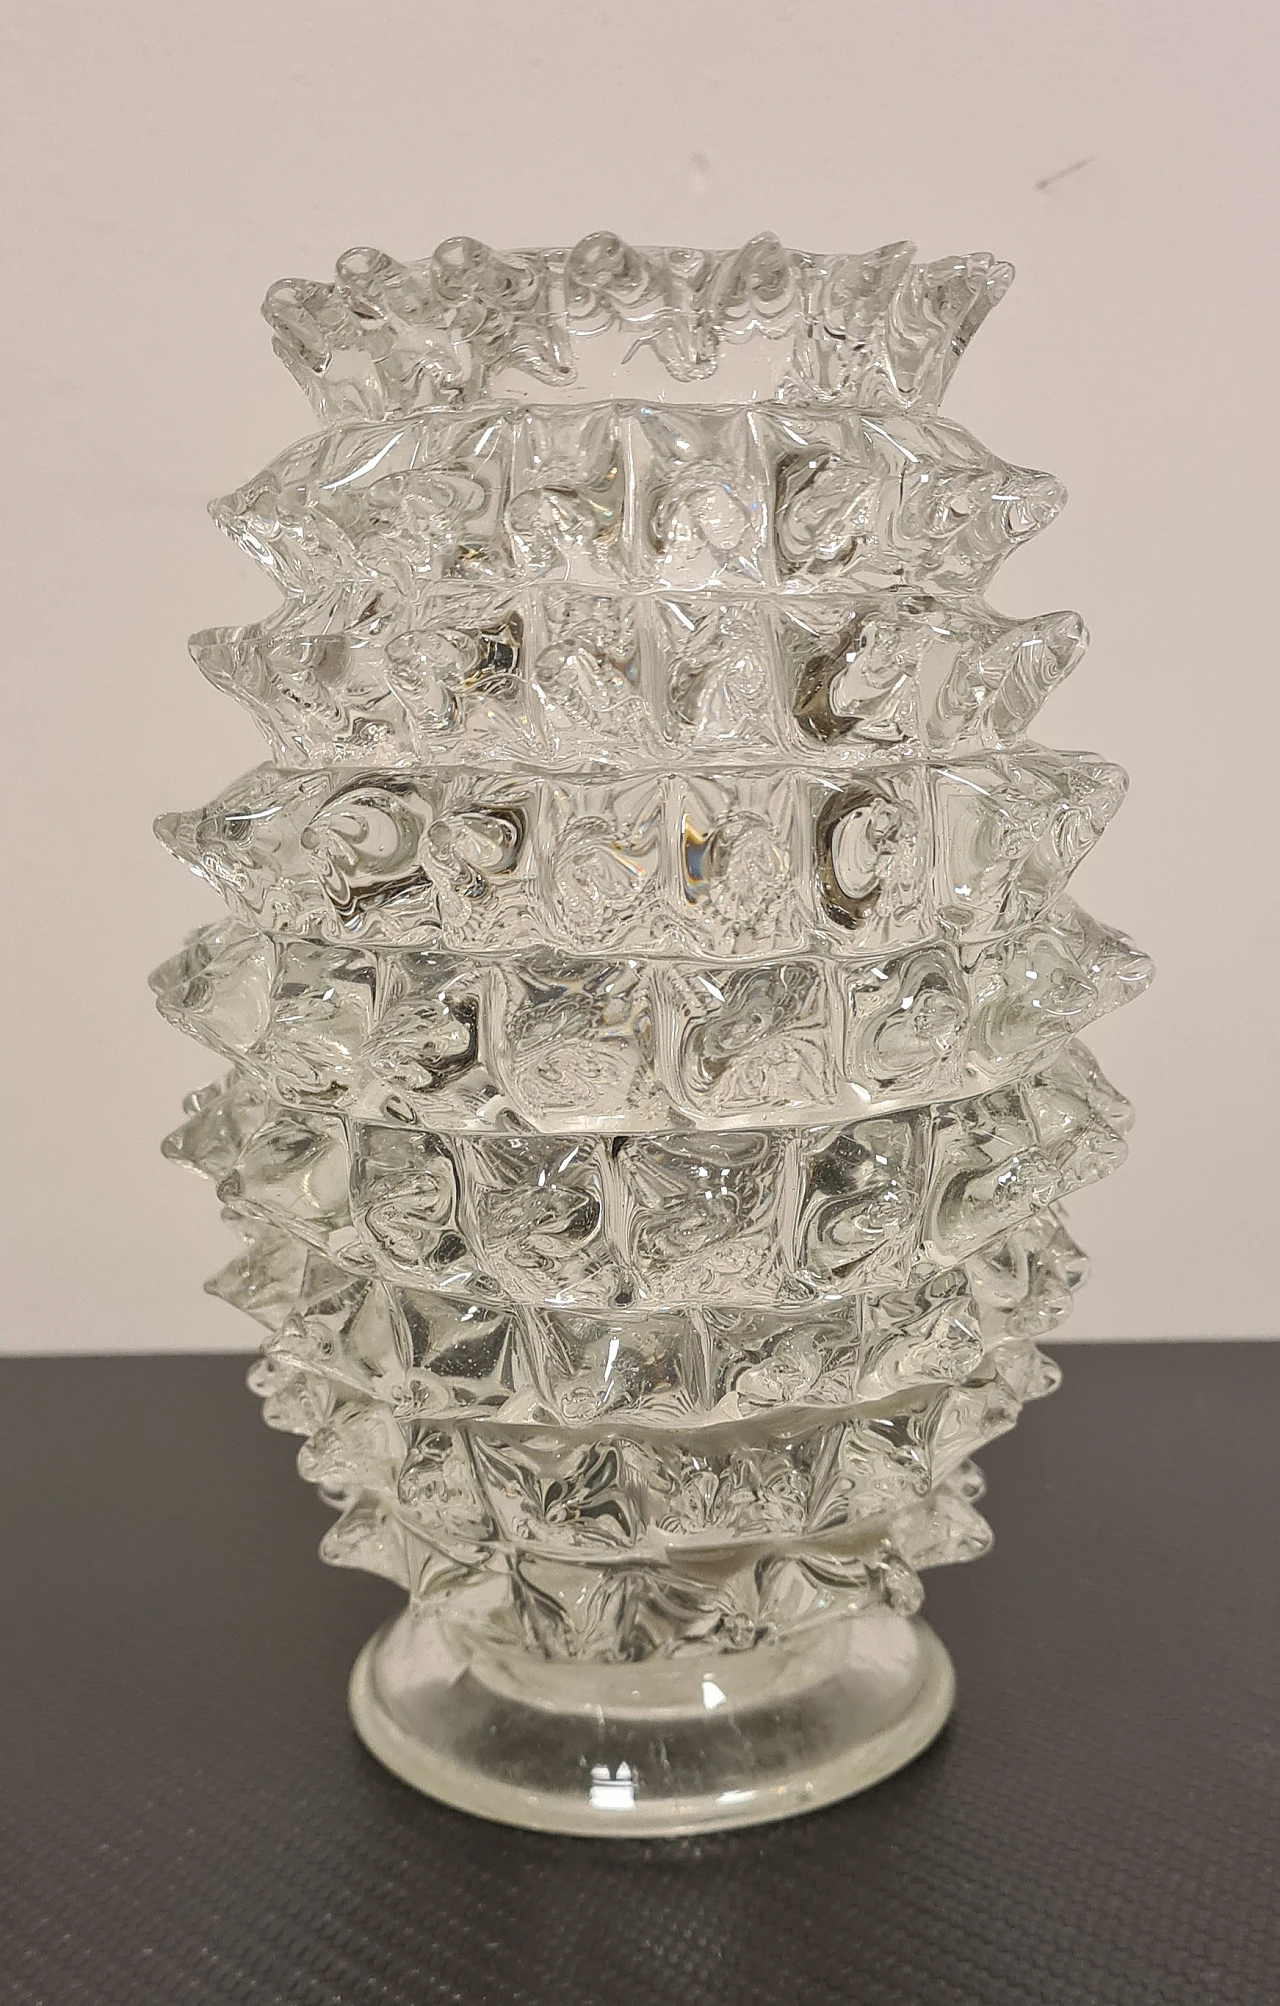 Rostered Murano glass vase by Barovier and Toso, 1940s 20